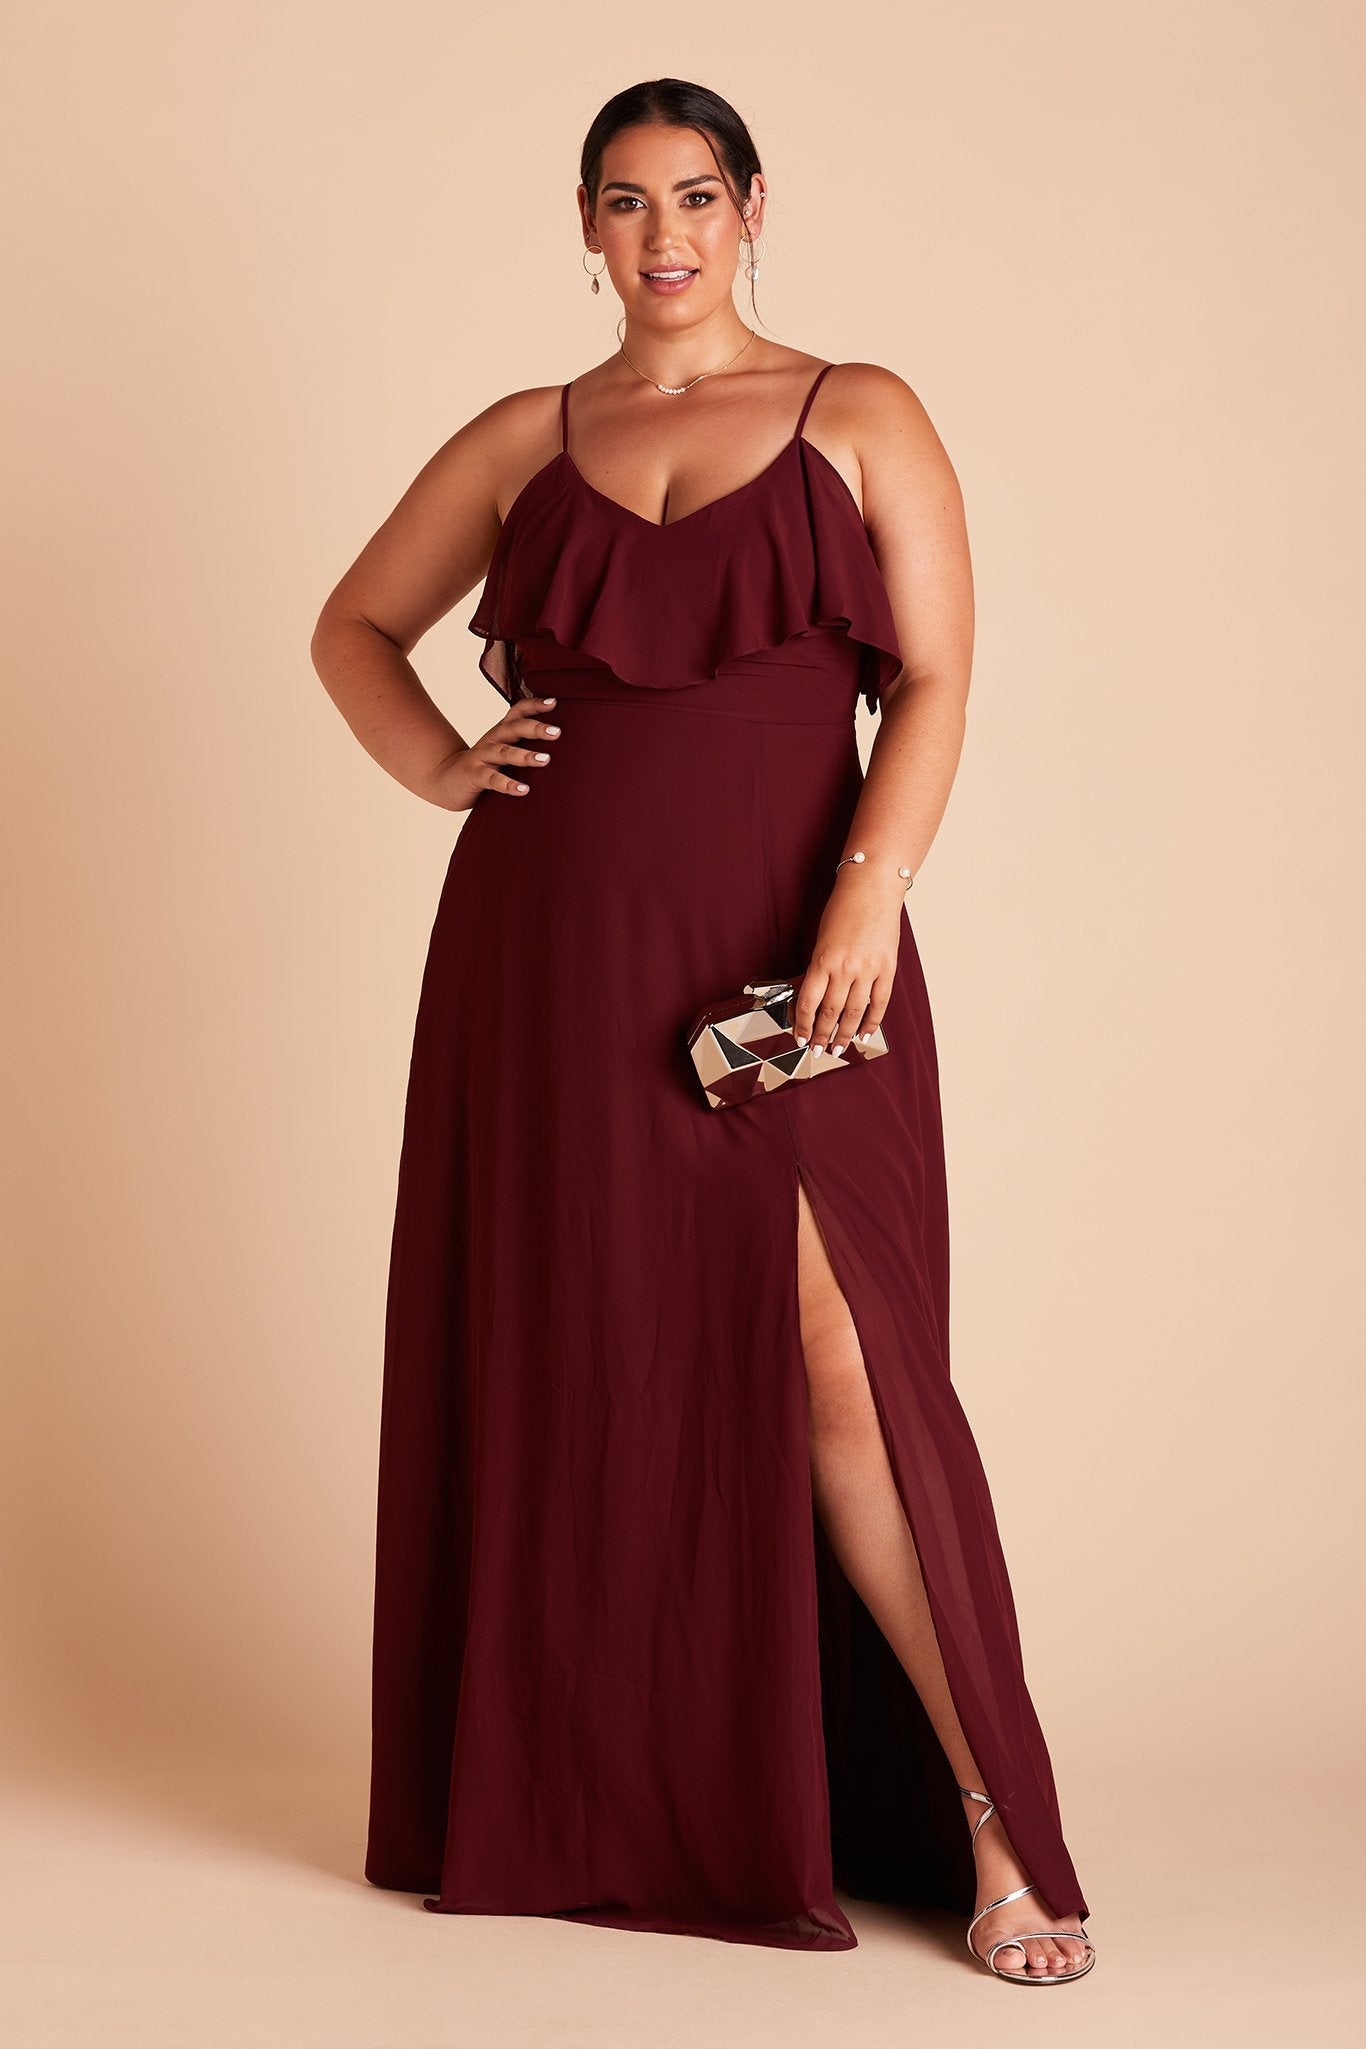 Jane convertible plus size bridesmaid dress with slit in Cabernet Burgundy chiffon by Birdy Grey, front view